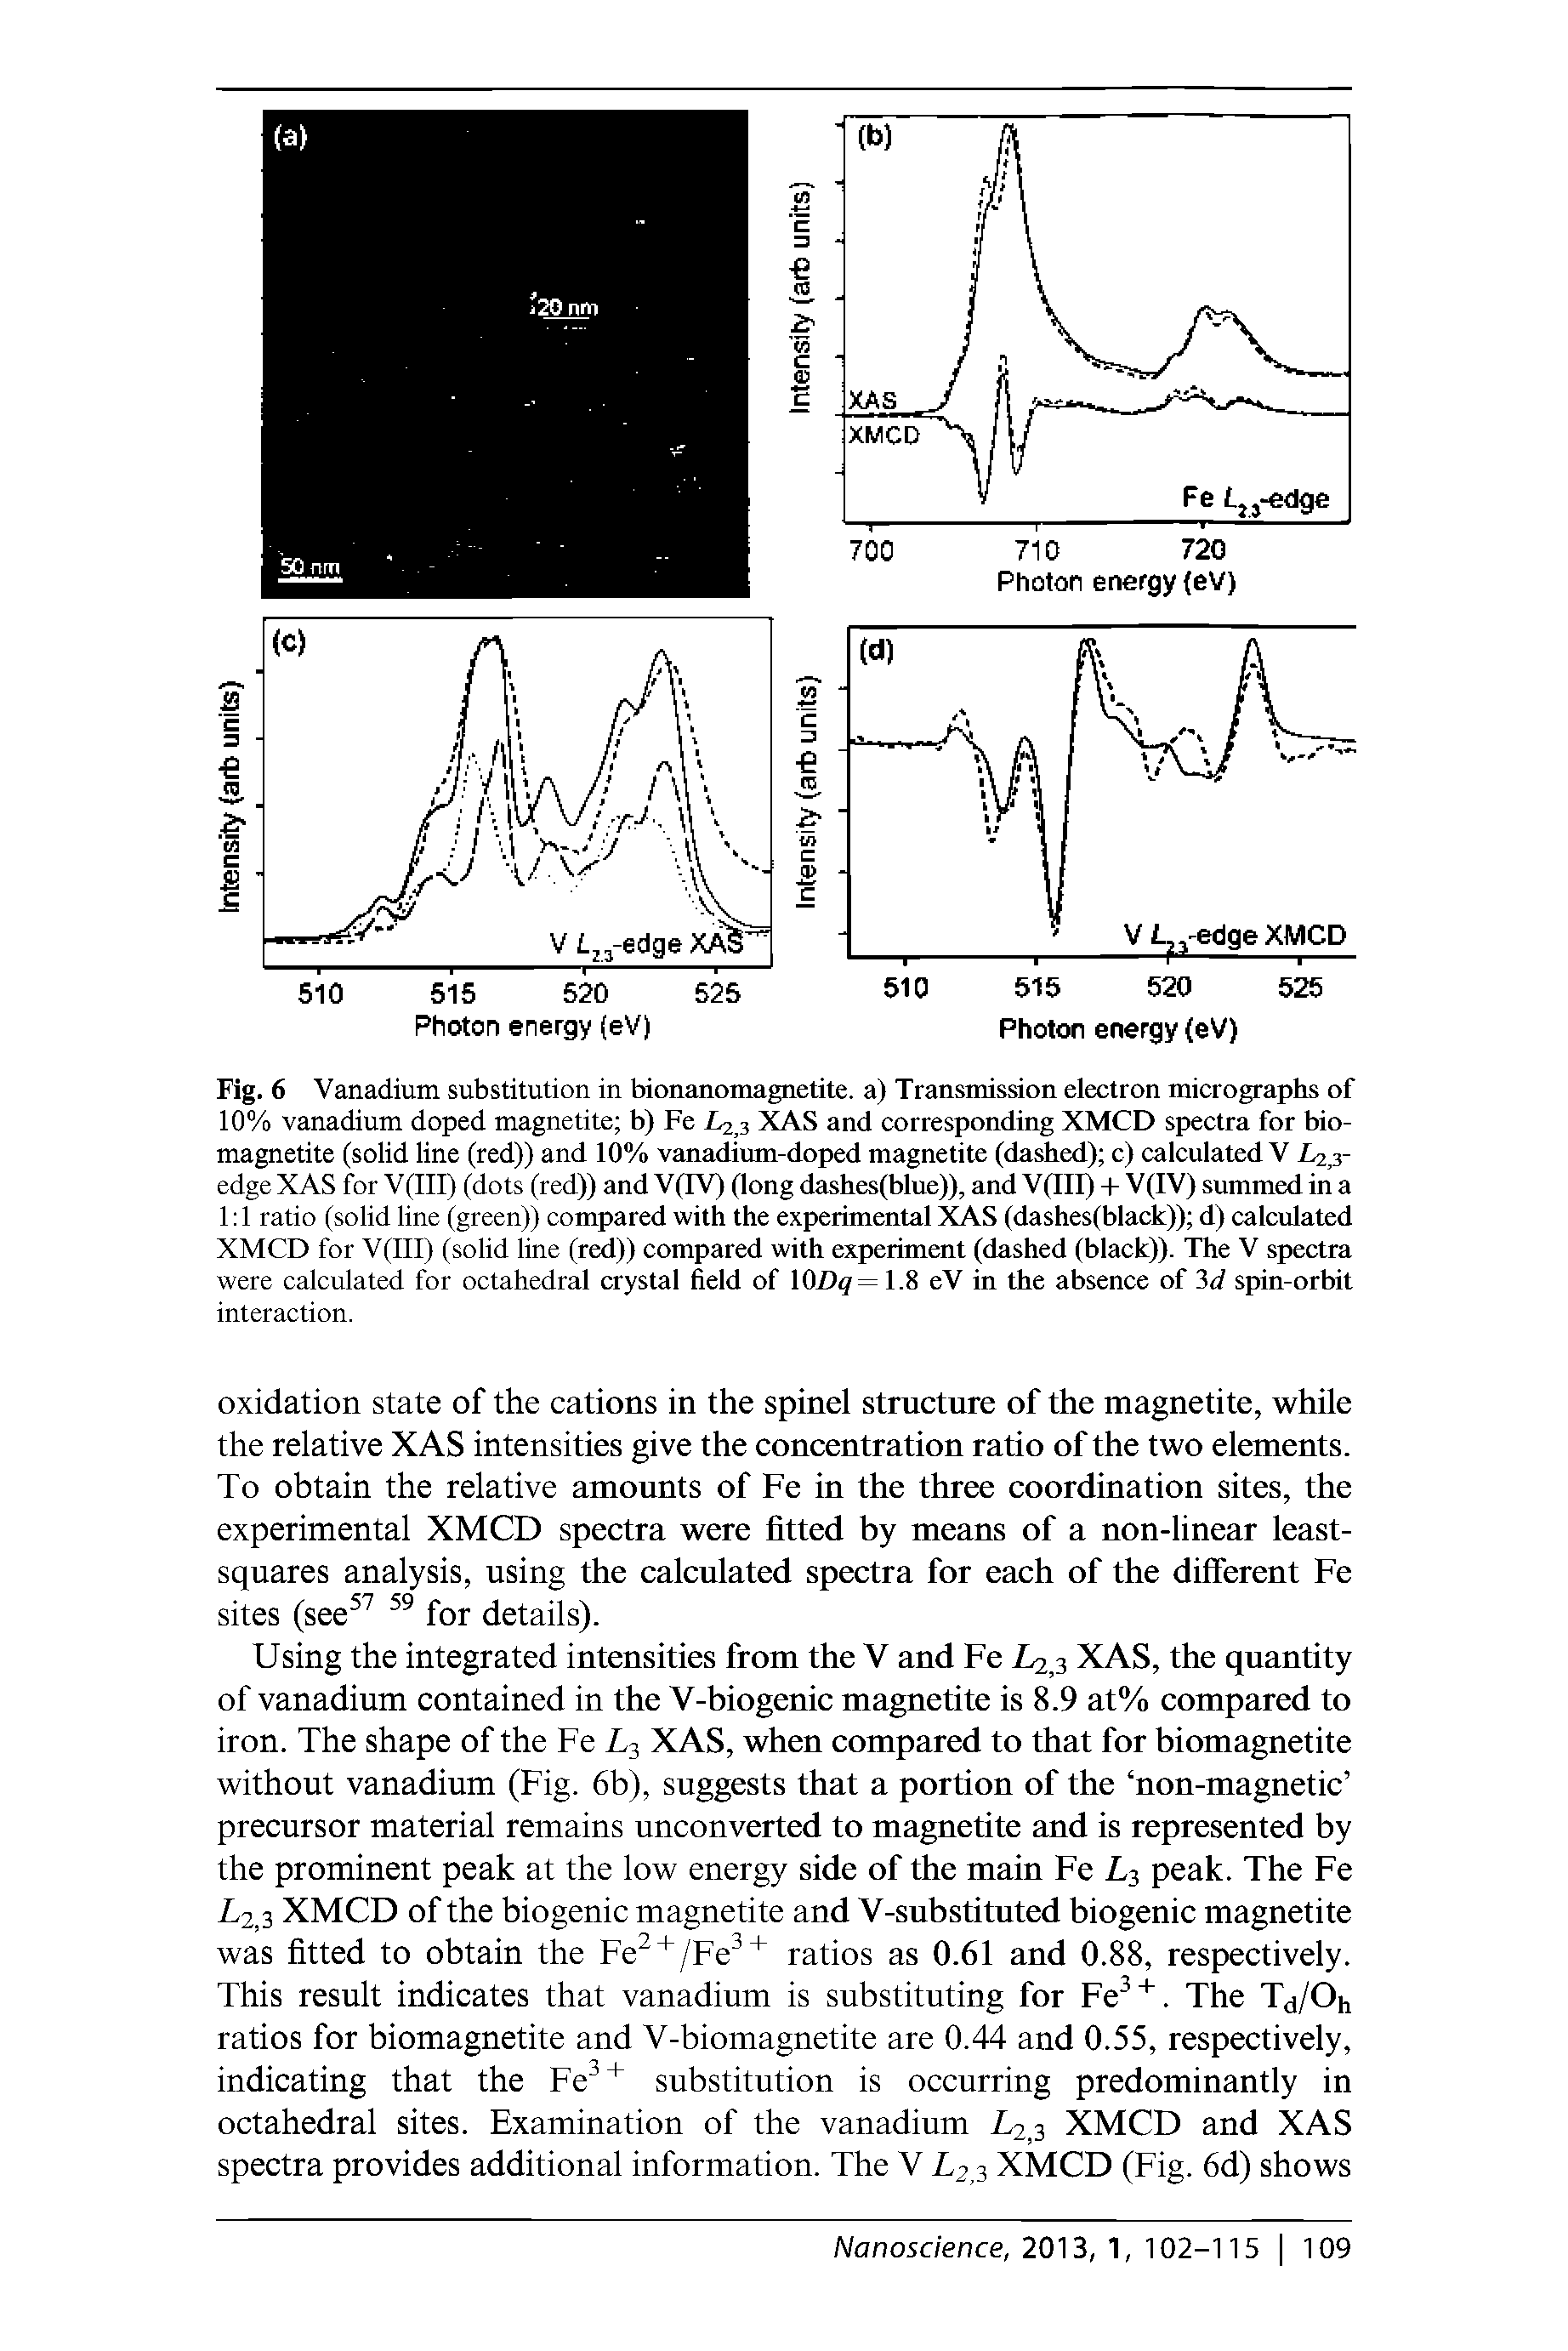 Fig. 6 Vanadium substitution in bionanomagnetite, a) Transmission electron micrographs of 10% vanadium doped magnetite b) Fe 1.2,3 XAS and corresponding XMCD spectra for biomagnetite (solid line (red)) and 10% vanadium-doped magnetite (dashed) c) calculated V La edge XAS for V(III) (dots (red)) and V(IV) (long dashes(blue)), and V(III) - - V(IV) summed in a 1 1 ratio (solid line (green)) compared with the experimental XAS (dashes(black)) d) calculated XMCD for V(III) (solid line (red)) compared with experiment (dashed (black)). The V spectra were calculated for octahedral crystal field of 10Z) =1.8 eV in the absence of 3d spin-orbit interaction.